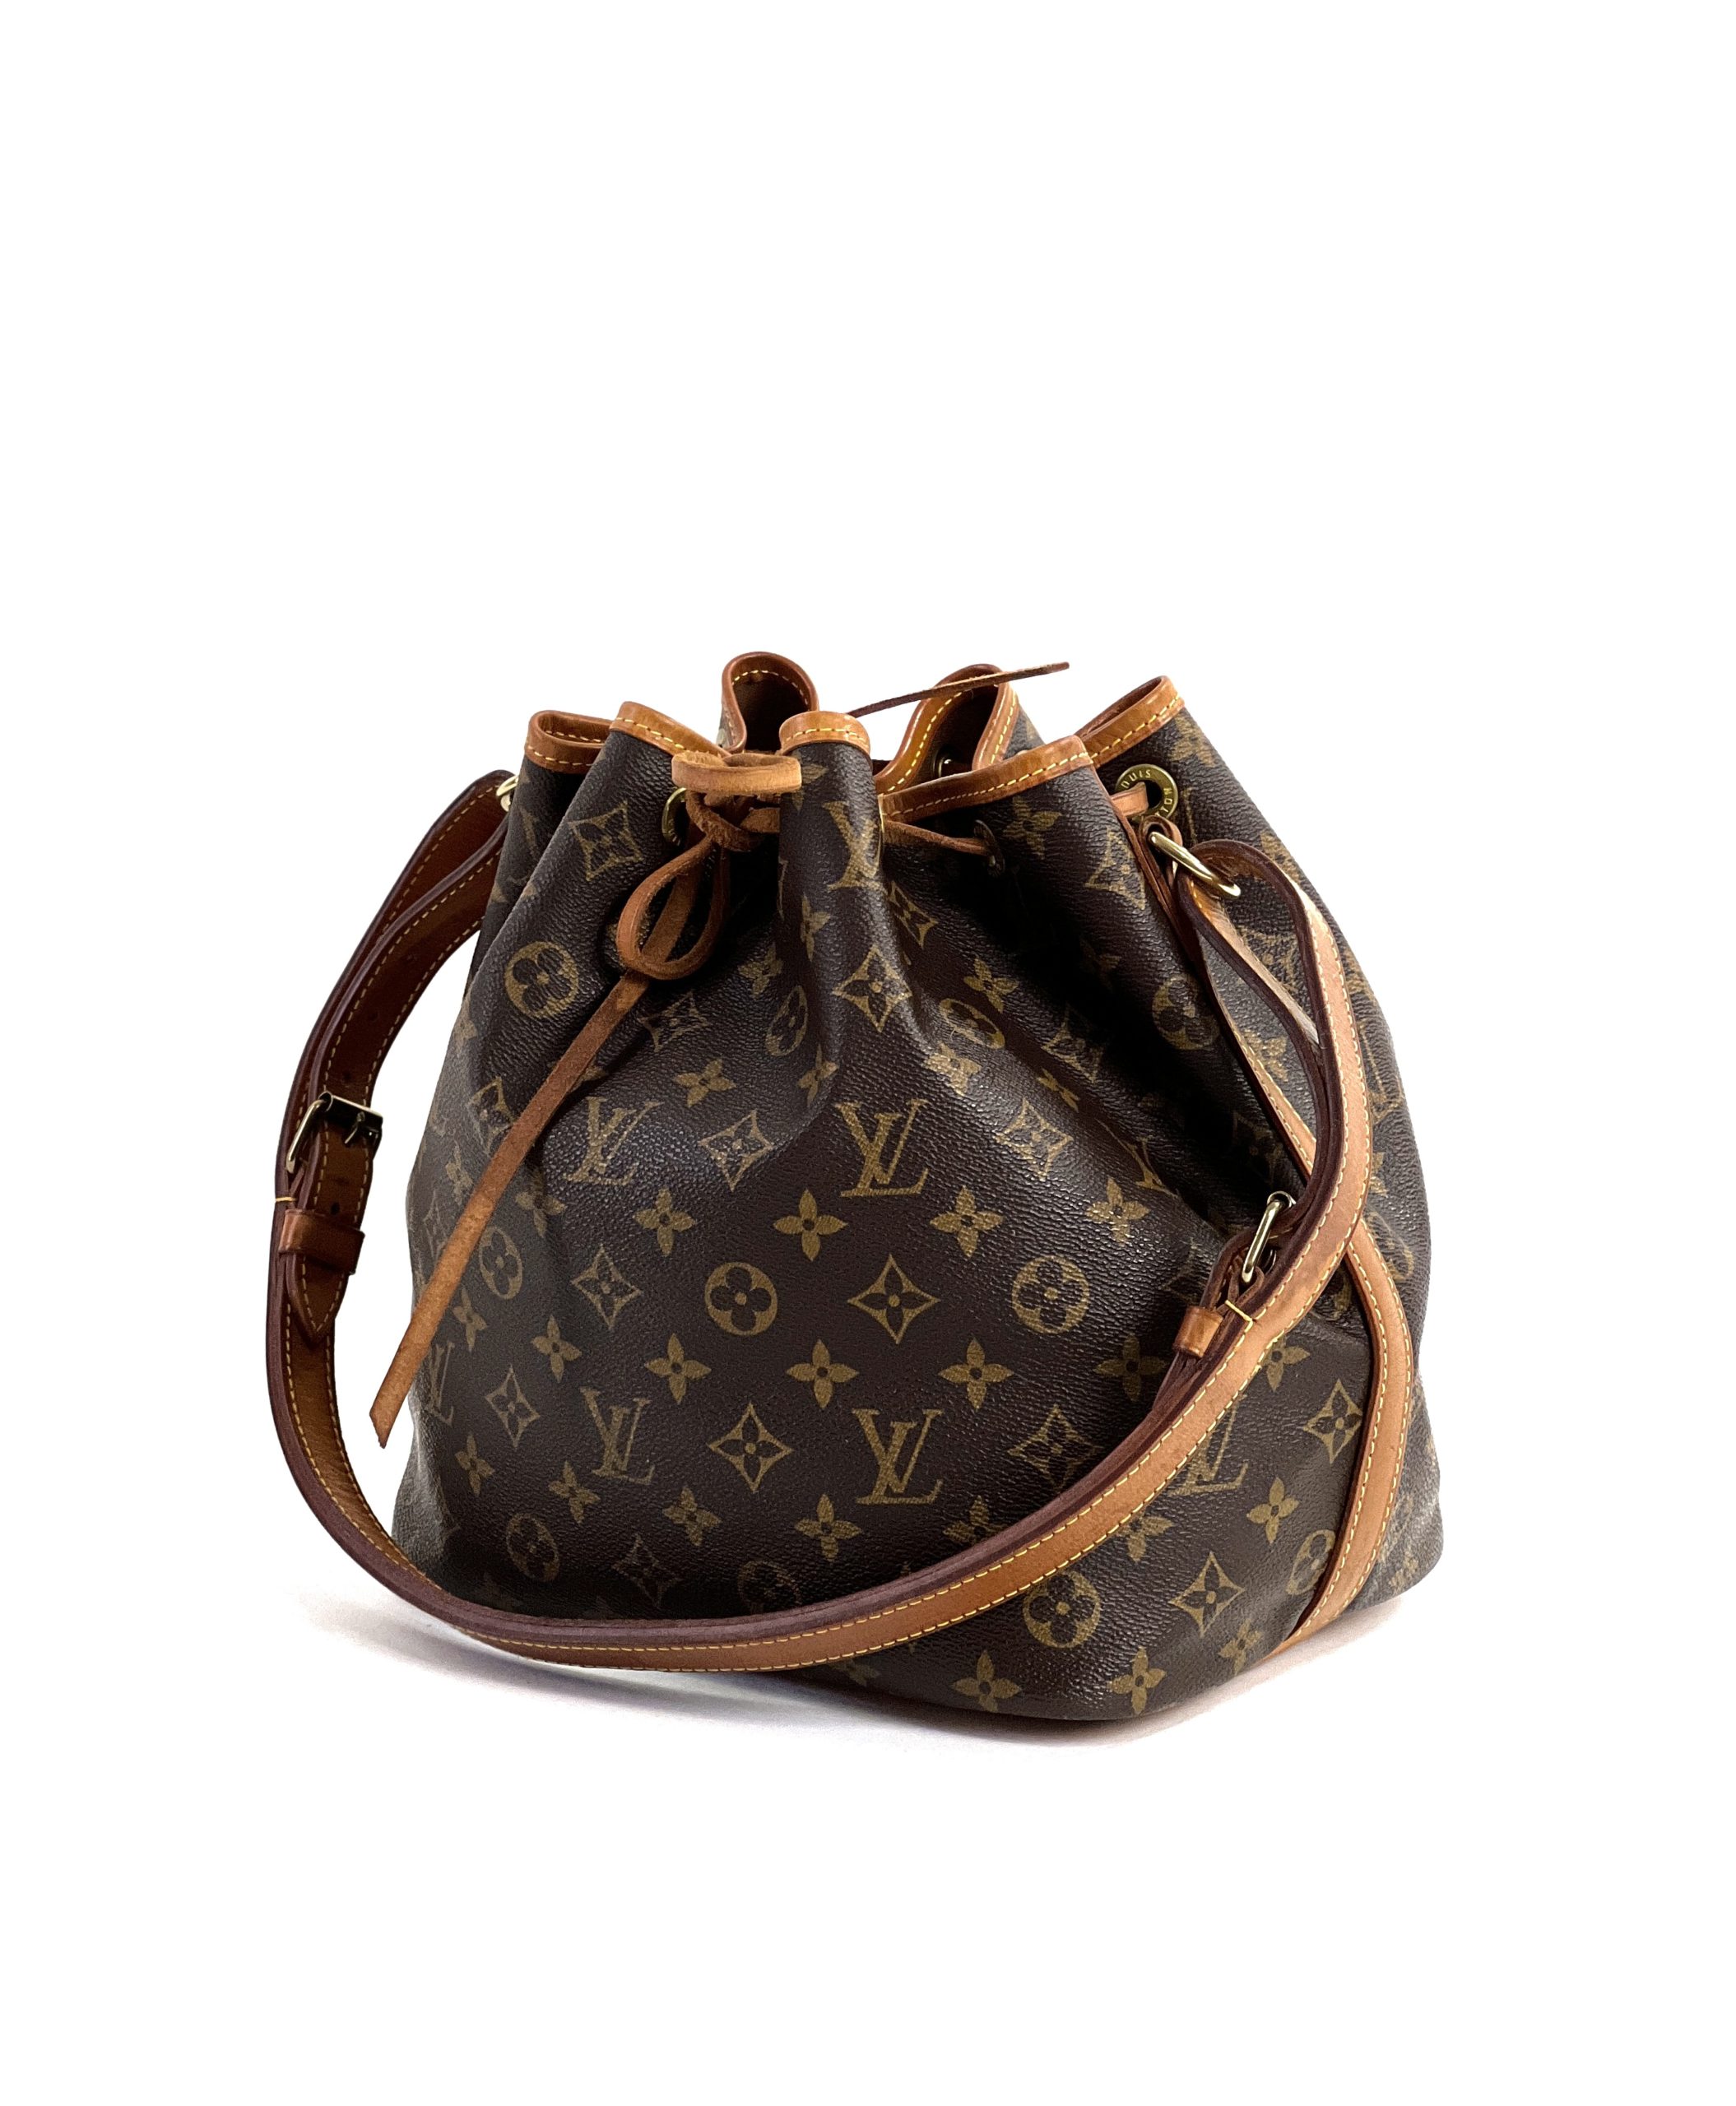 Best Louis Vuitton Turenne Mm for sale in Naperville, Illinois for 2023